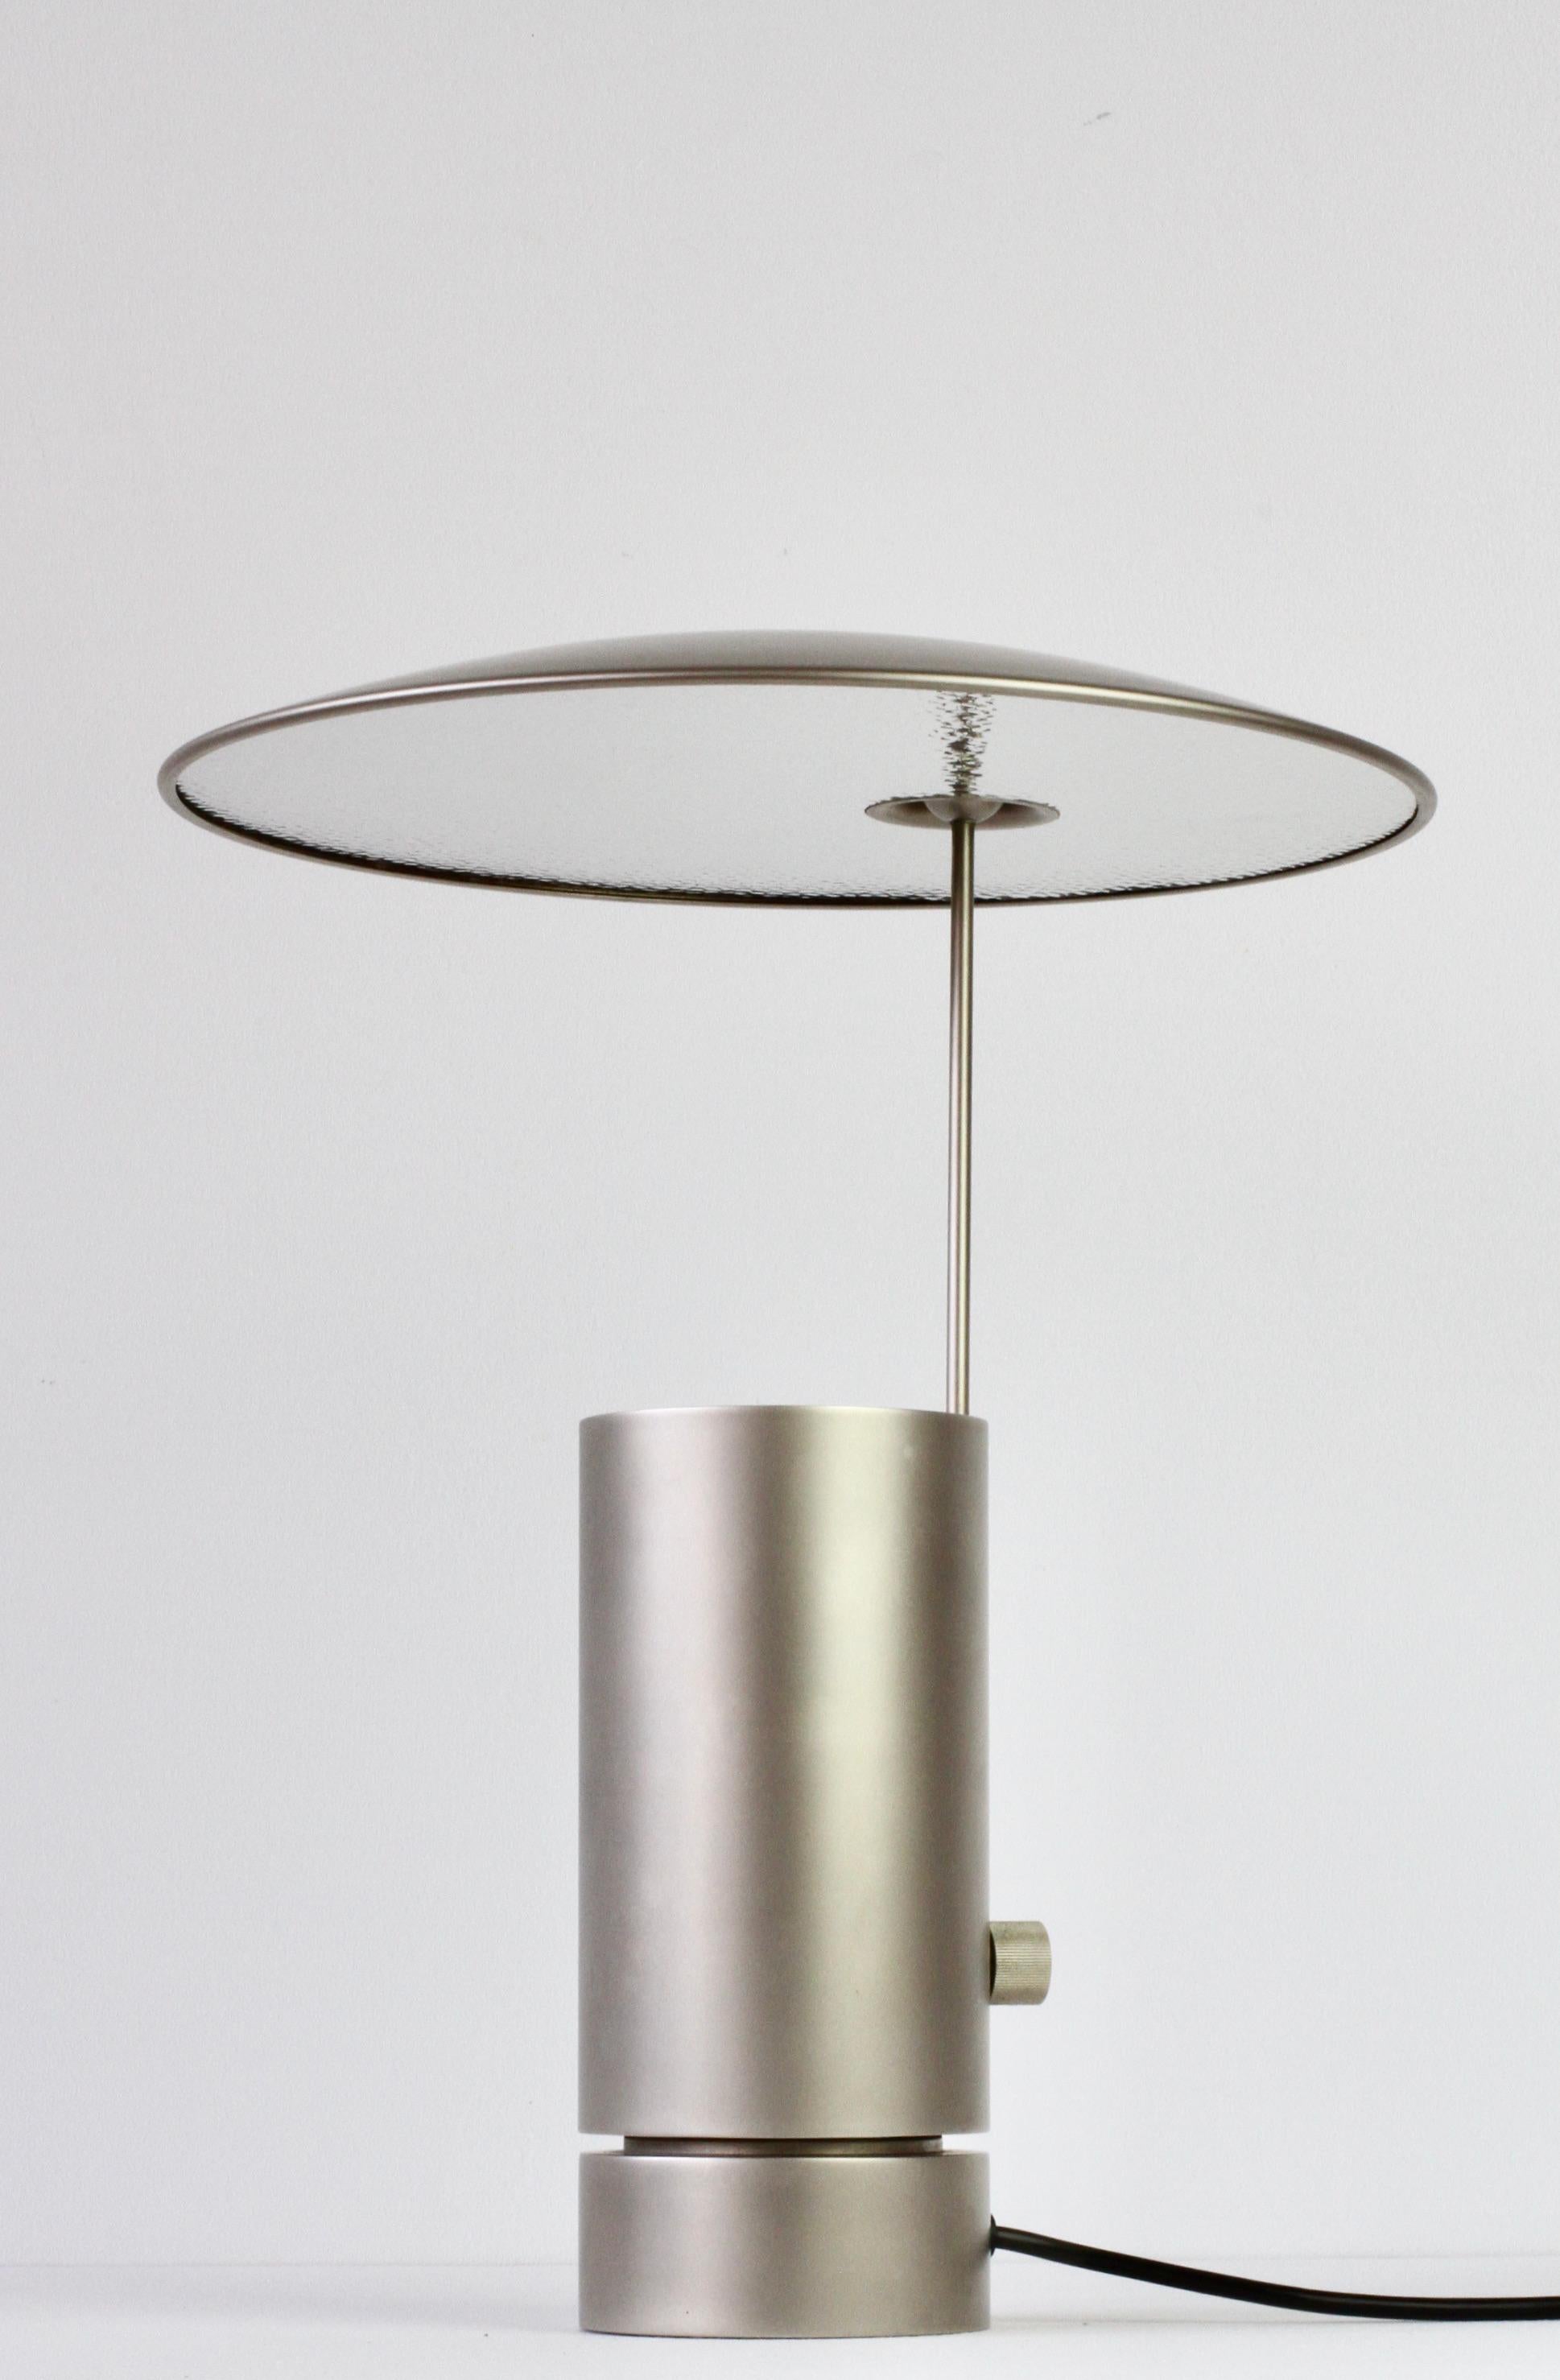 Incredibly rare and hard to come by vintage Mid-Century Modern German made side table lamp or desk light by Florian Schulz circa 1990s - late 2000s. Featuring a satin matt brushed nickel finish and an ingeniously designed round adjustable shade